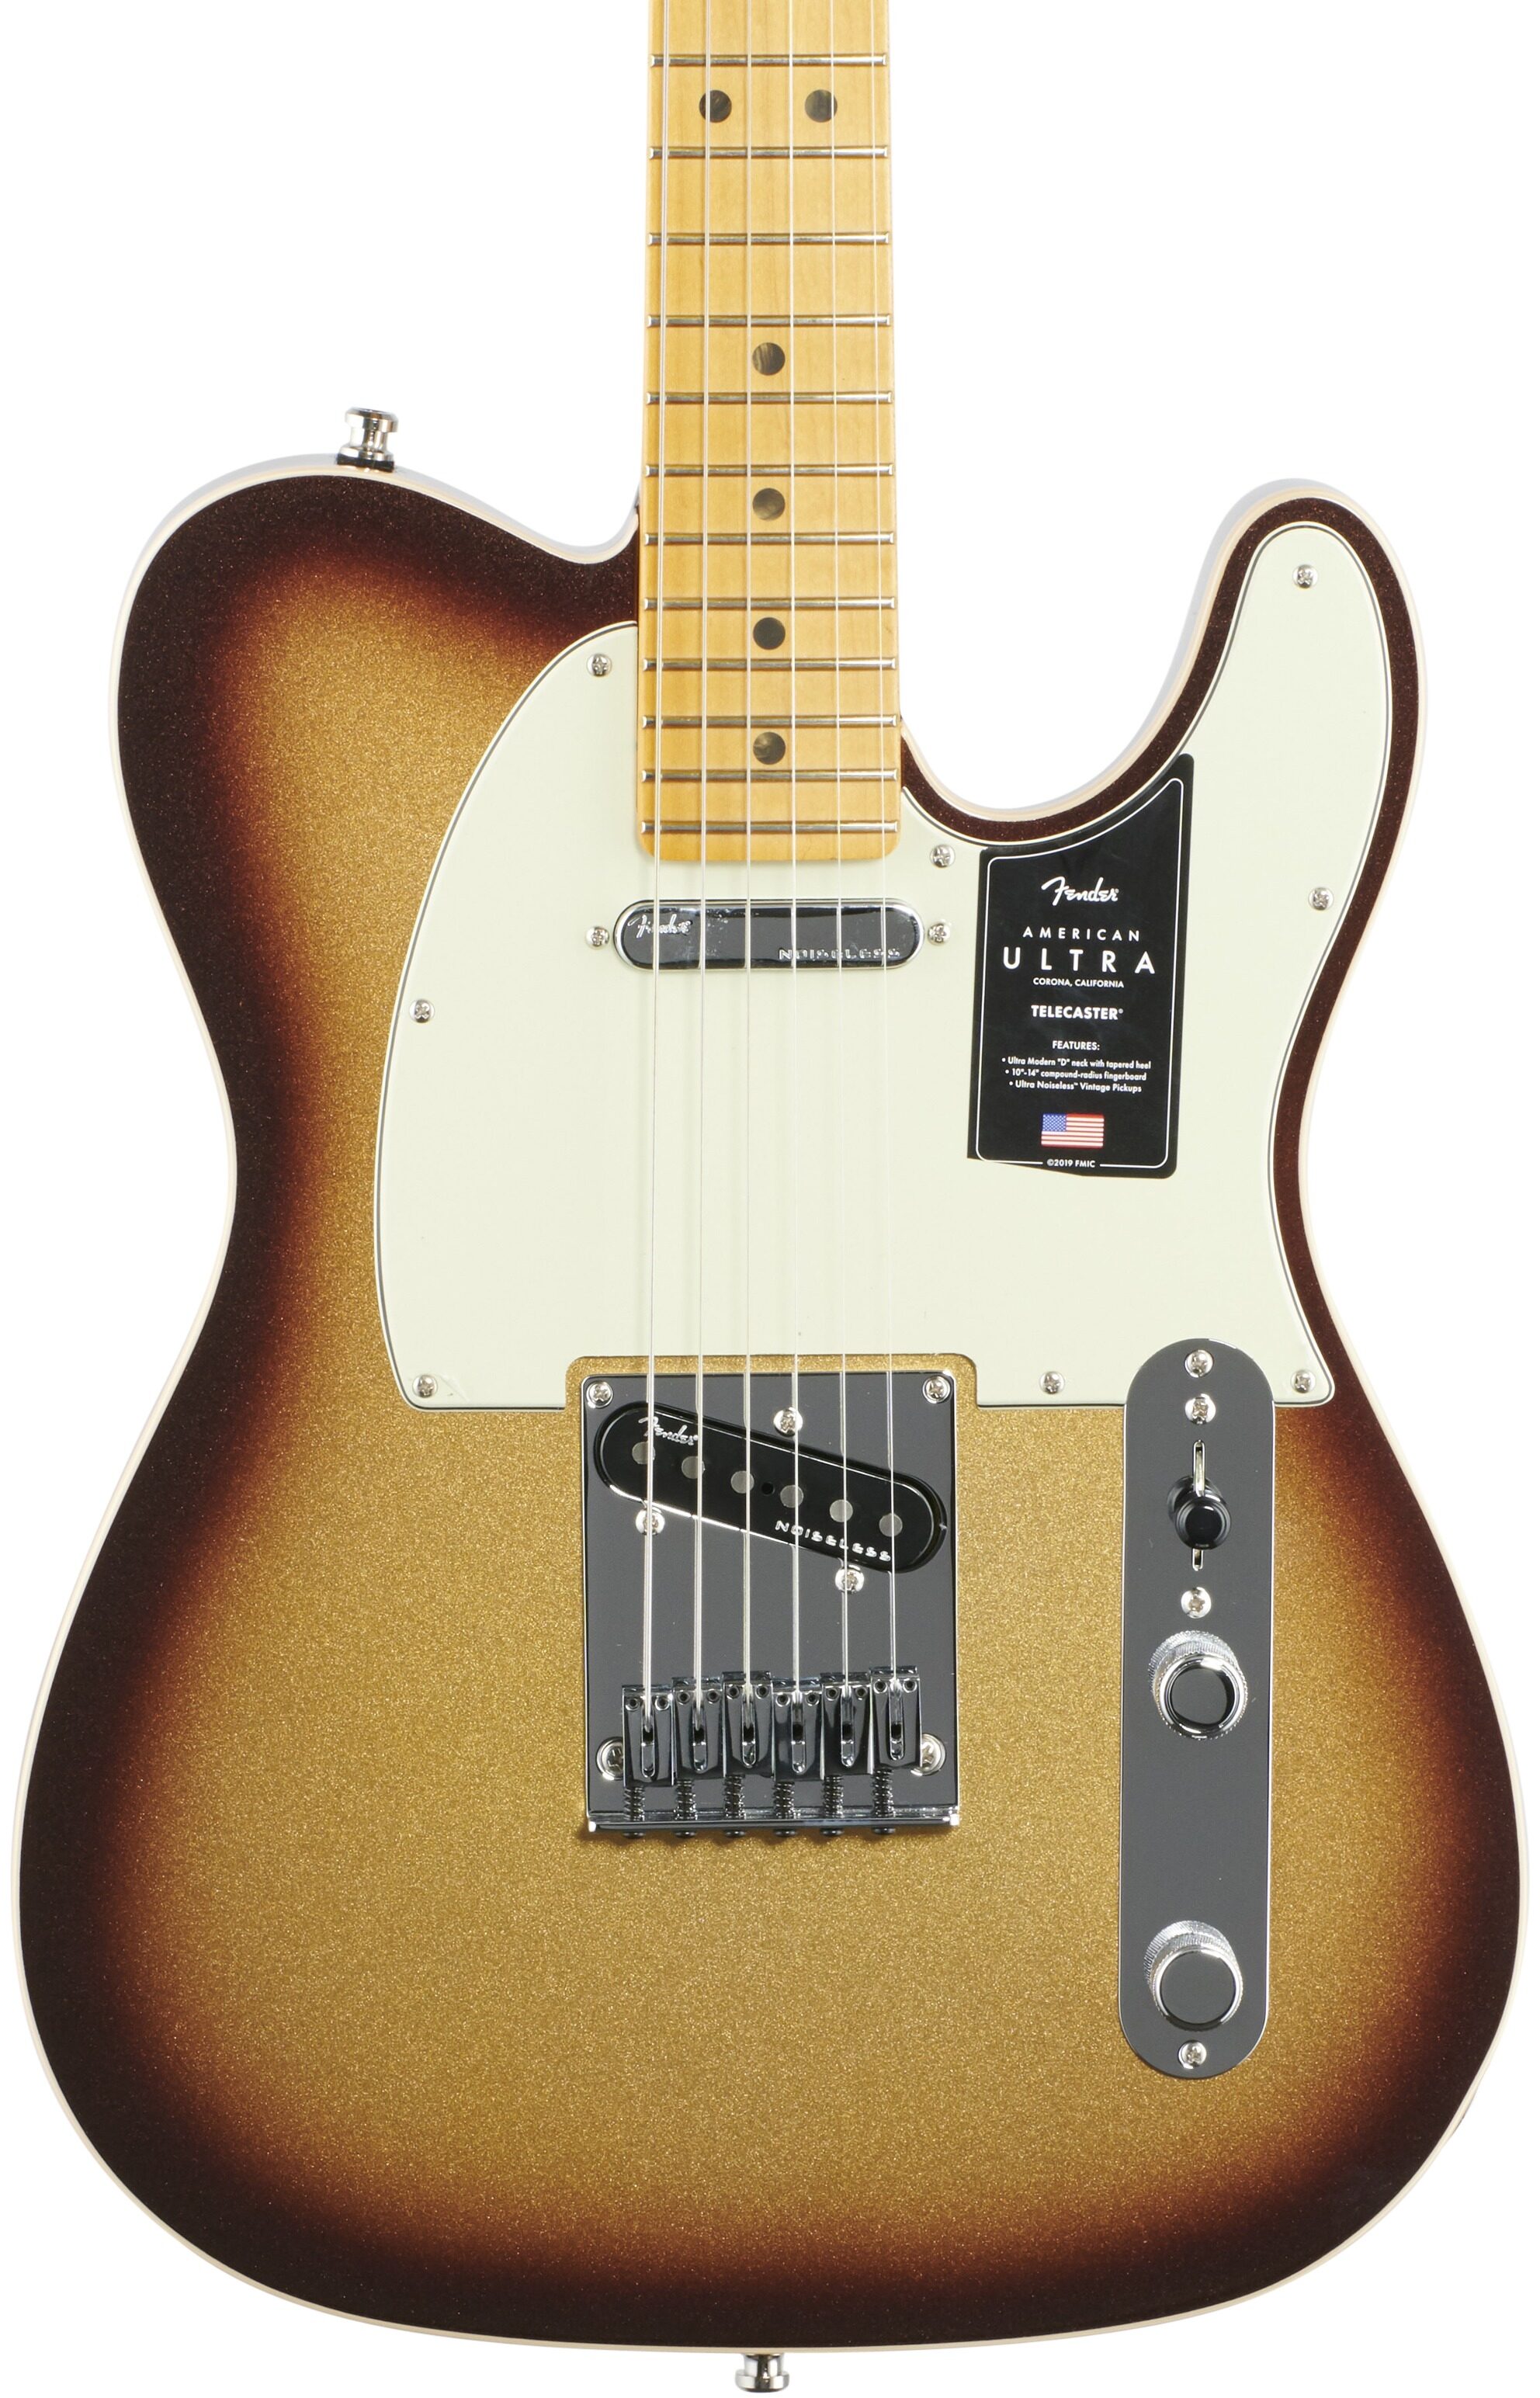 Fender American Ultra Telecaster Electric Guitar | zZounds